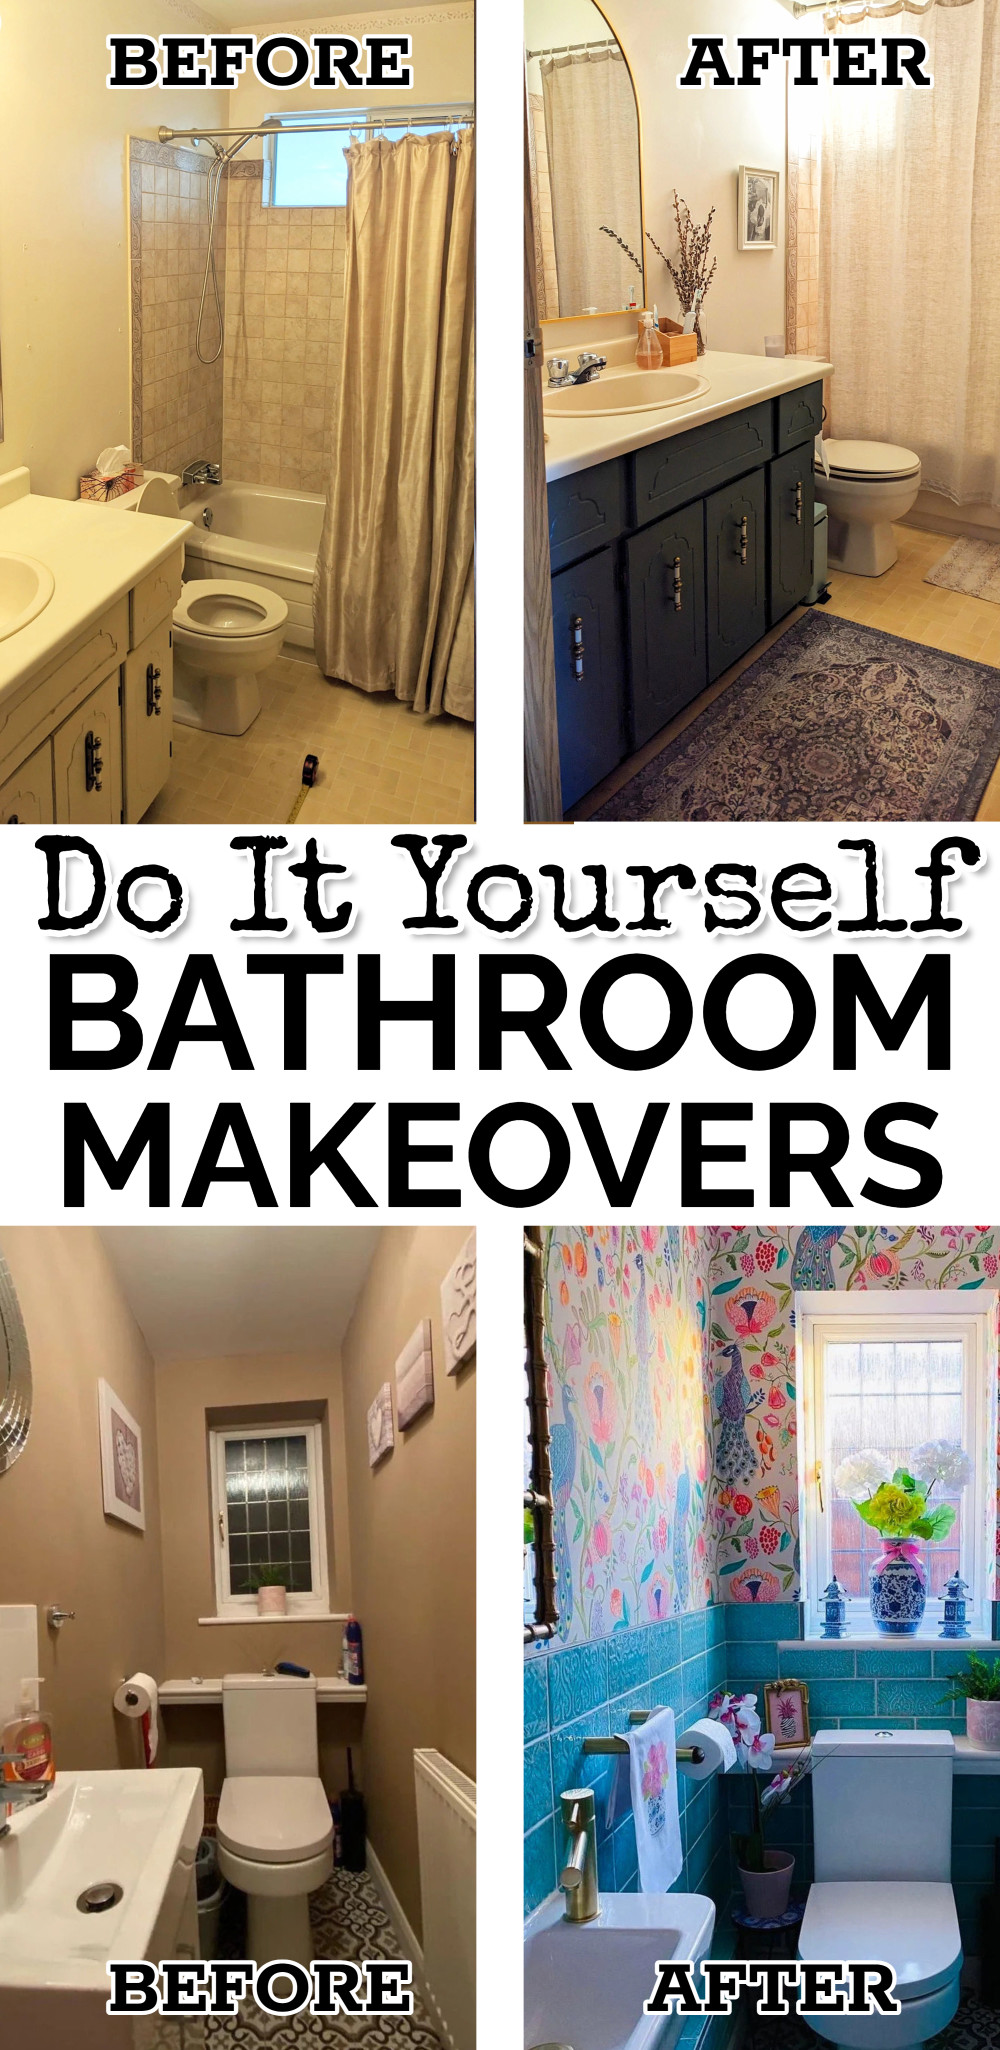 Do It Yourself Bathroom Makeovers Before and After Budget-Friendly Upgrades